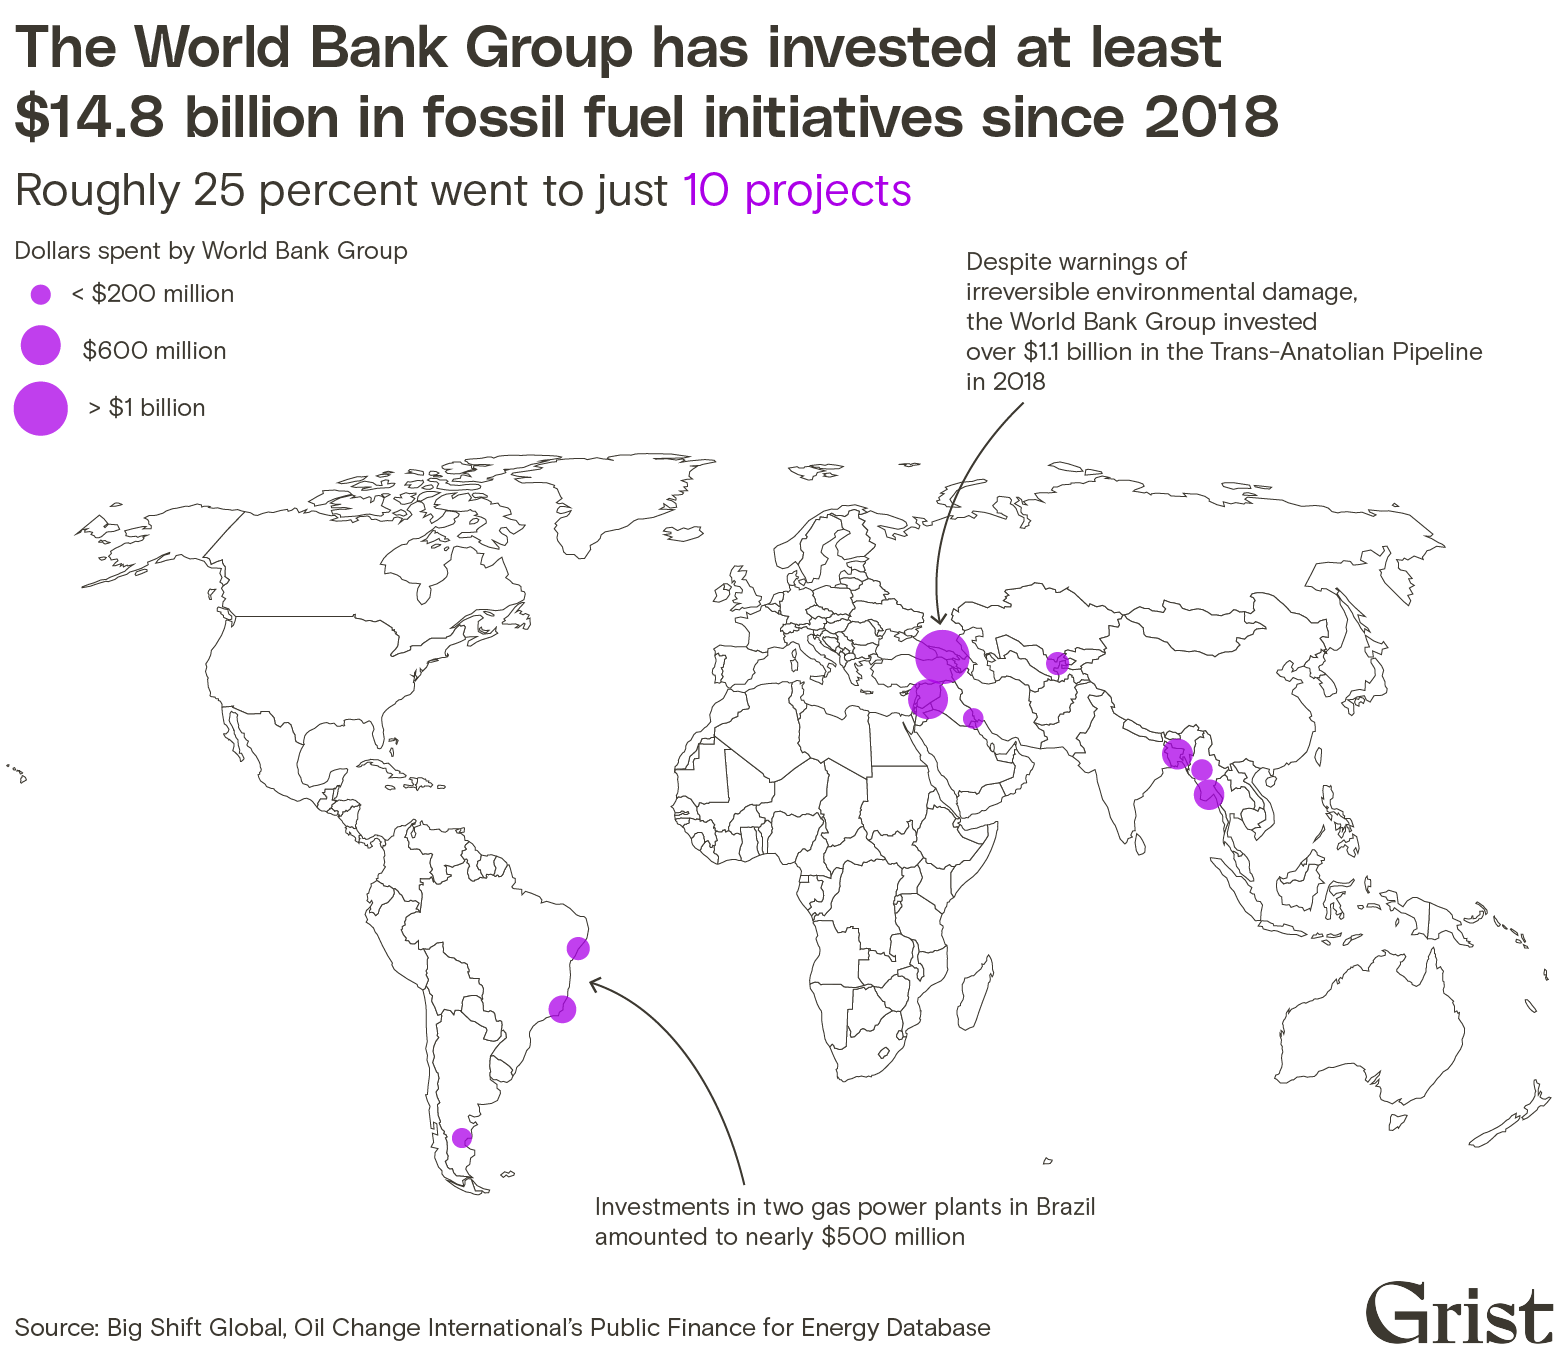 Graduated cylinder map showing the largest investments made by the World Bank Group around the world between 2018 and 2021.